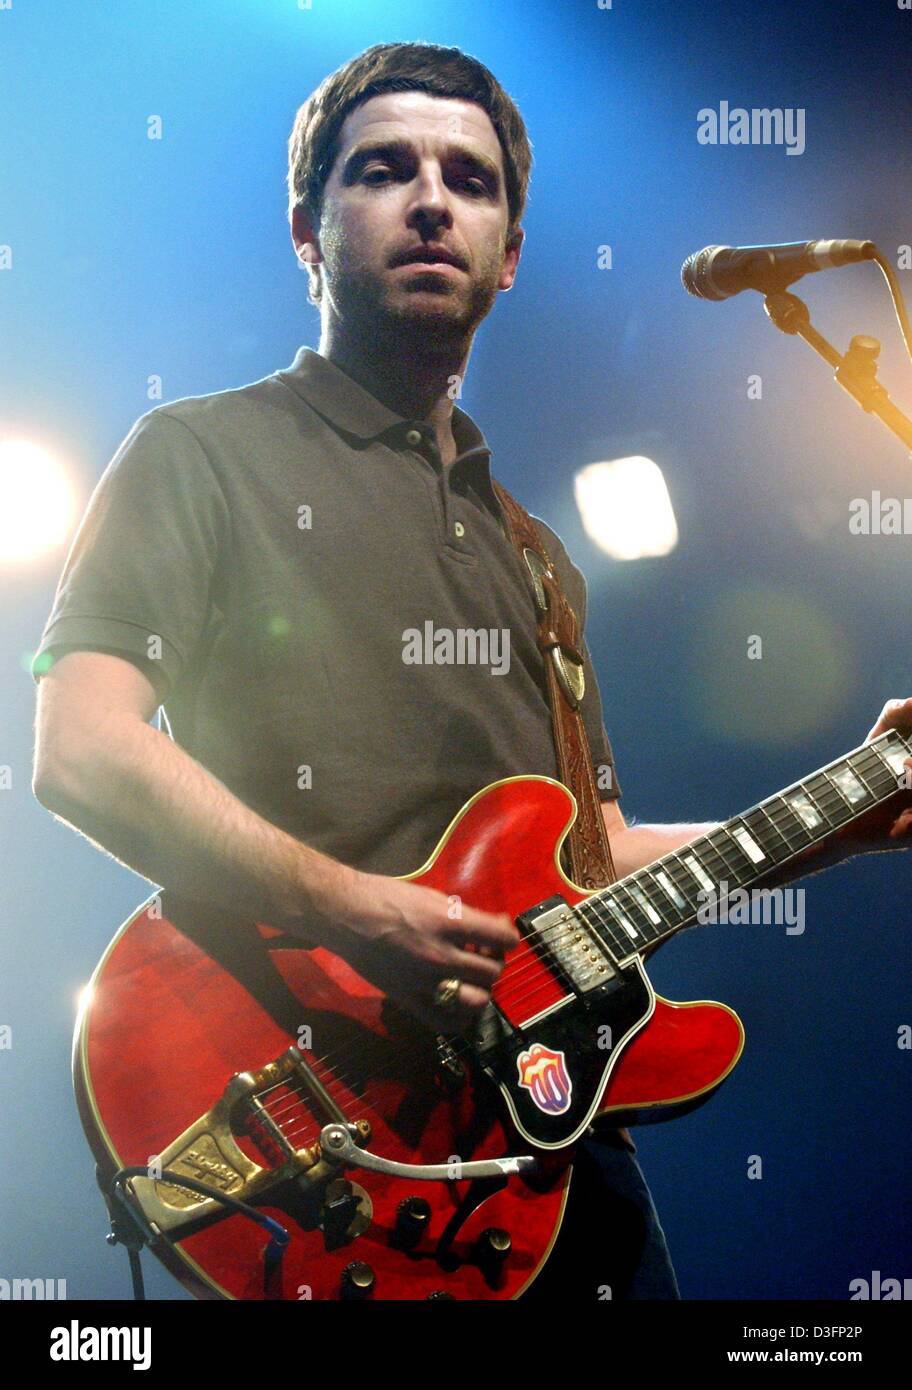 (dpa) - Noel Gallagher of the British pop band Oasis performs during a concert in Duesseldorf, Germany, 9 March 2003. After the band had to interrupt their concert tour through Germany last December when Noel Gallagher's brother lost two teeth in a fight in Munich, the band now continues their tour. Stock Photo